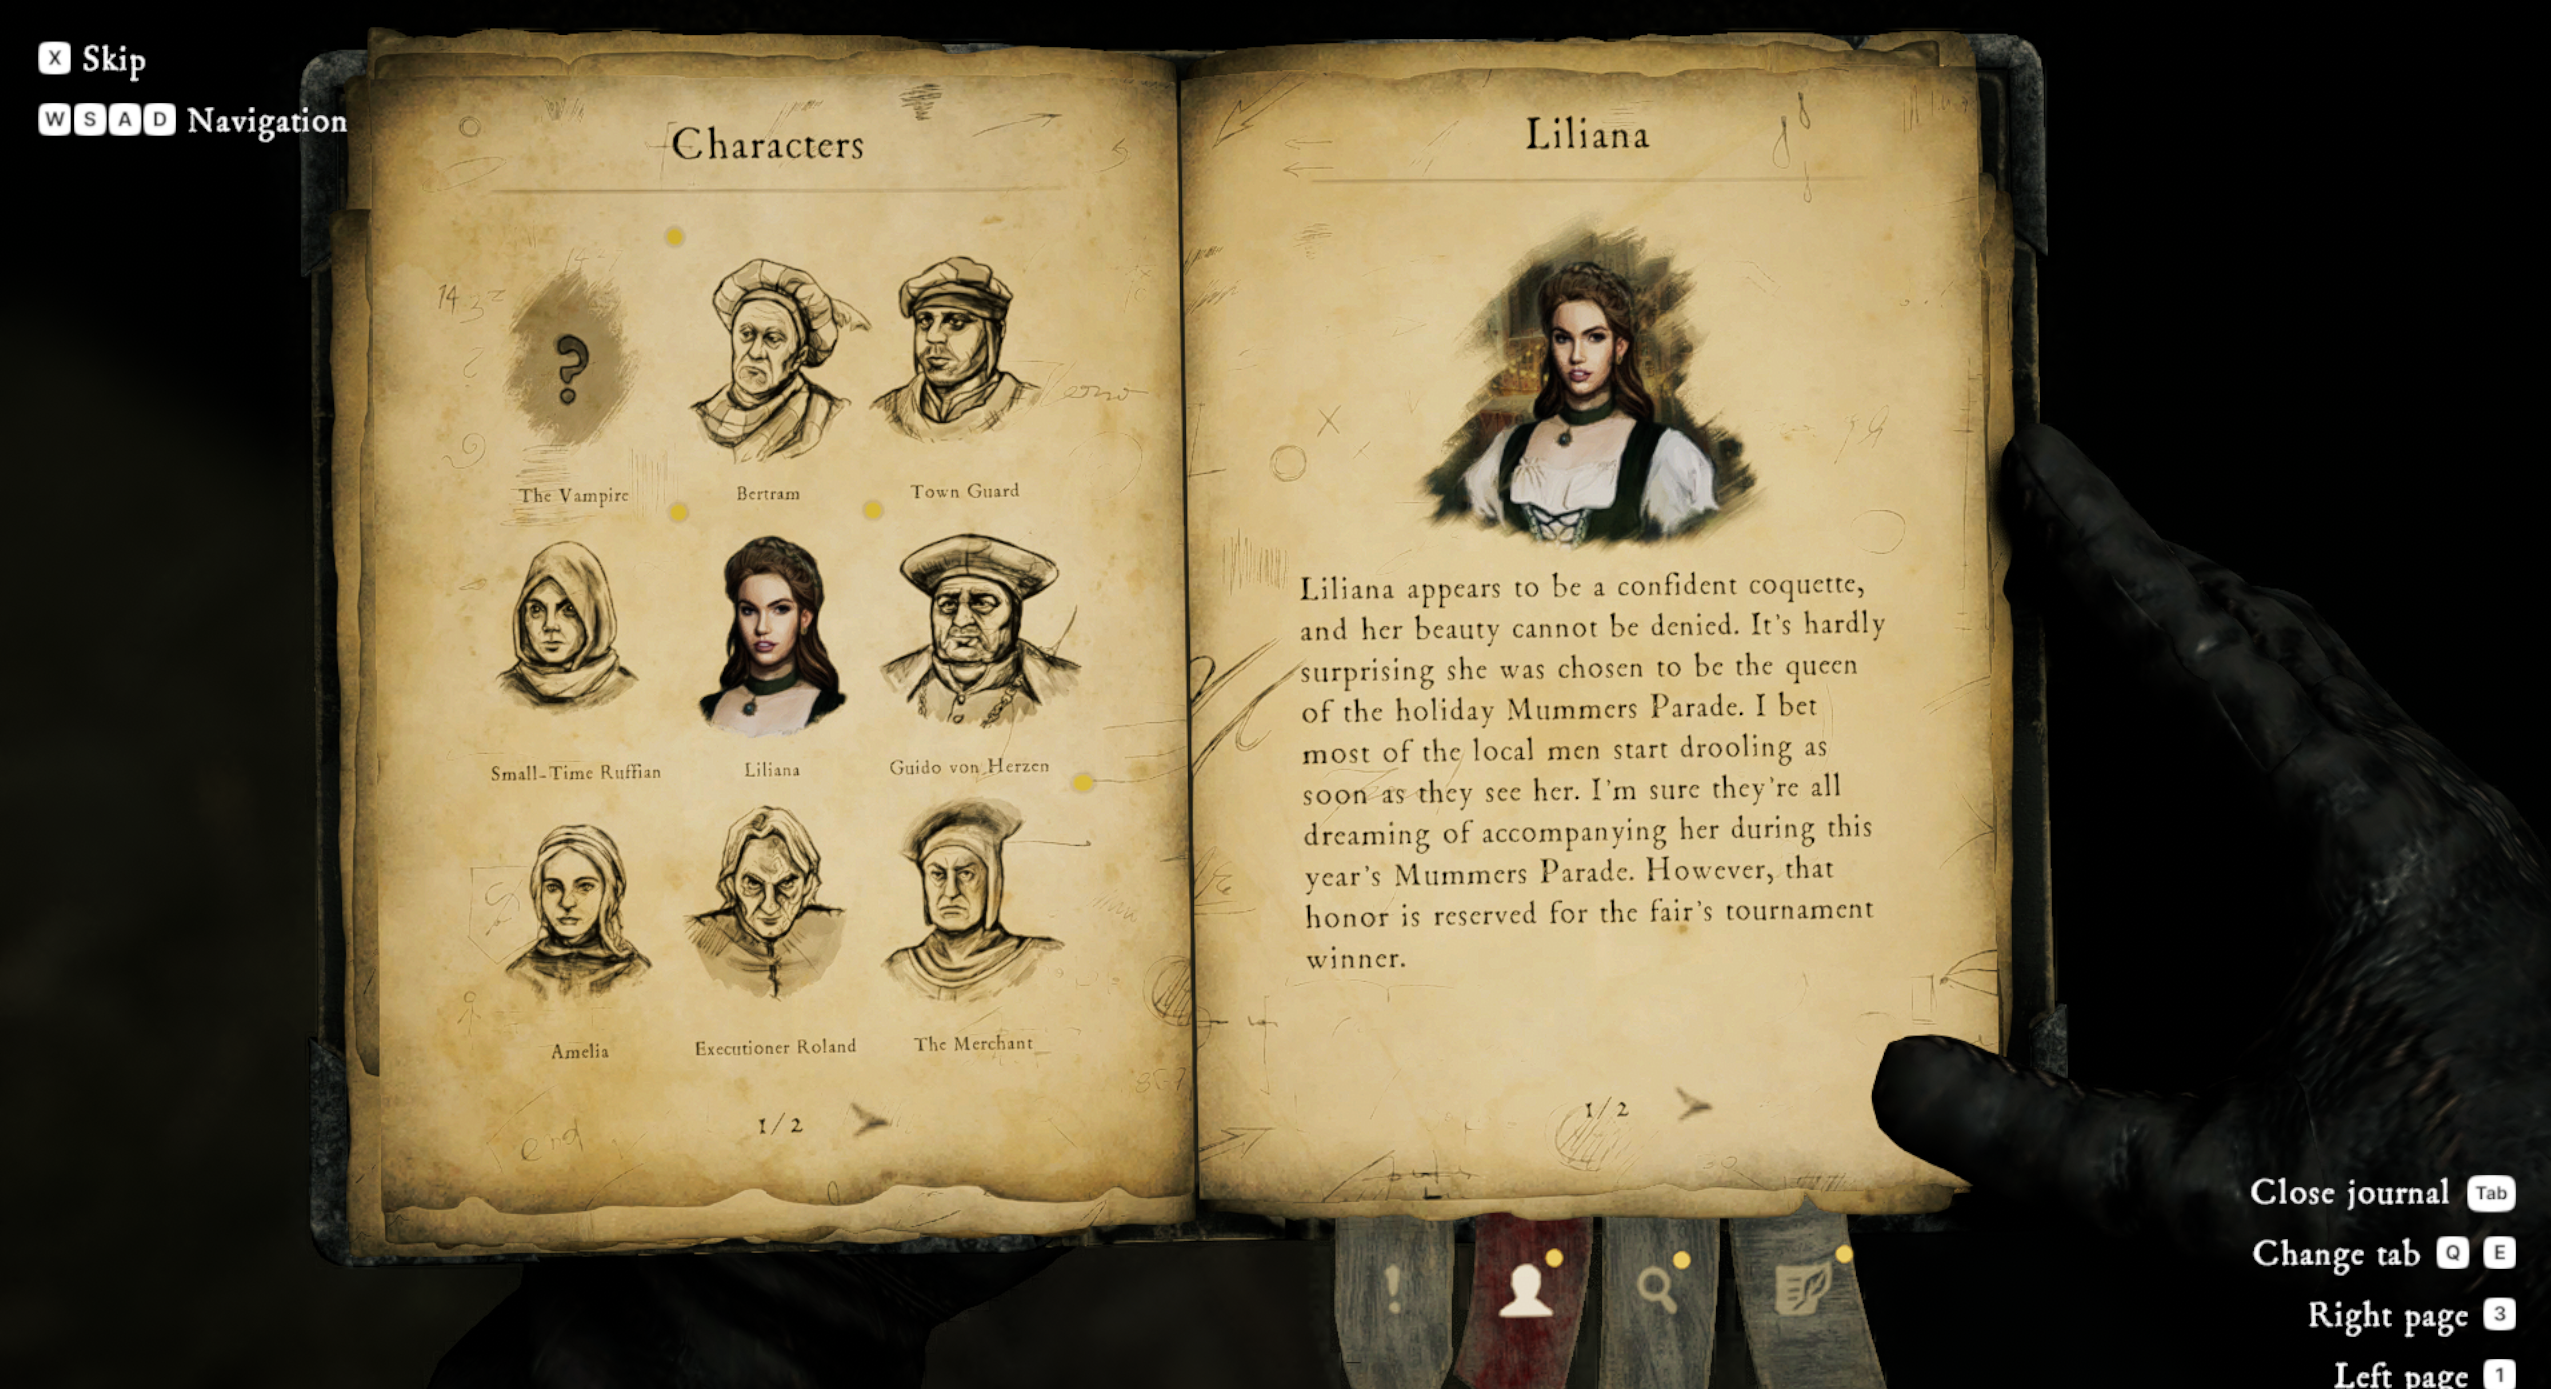 The Inquisitor review image showing Mordimer's journal.